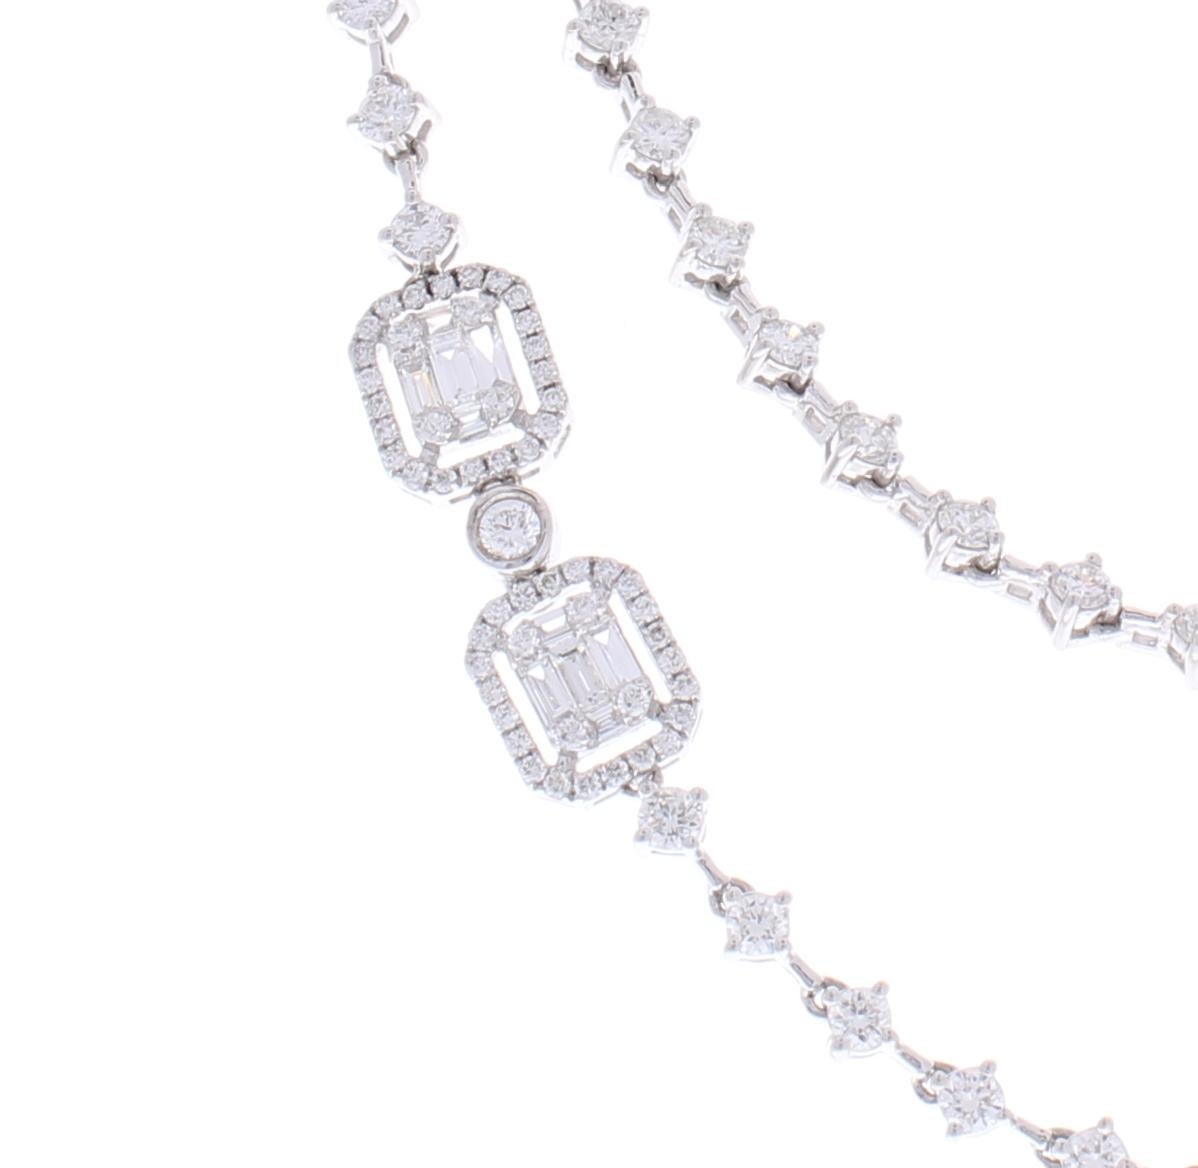 Contemporary 7.86 Carat Total Baguette and Round Diamond Necklace in 18 Karat White Gold